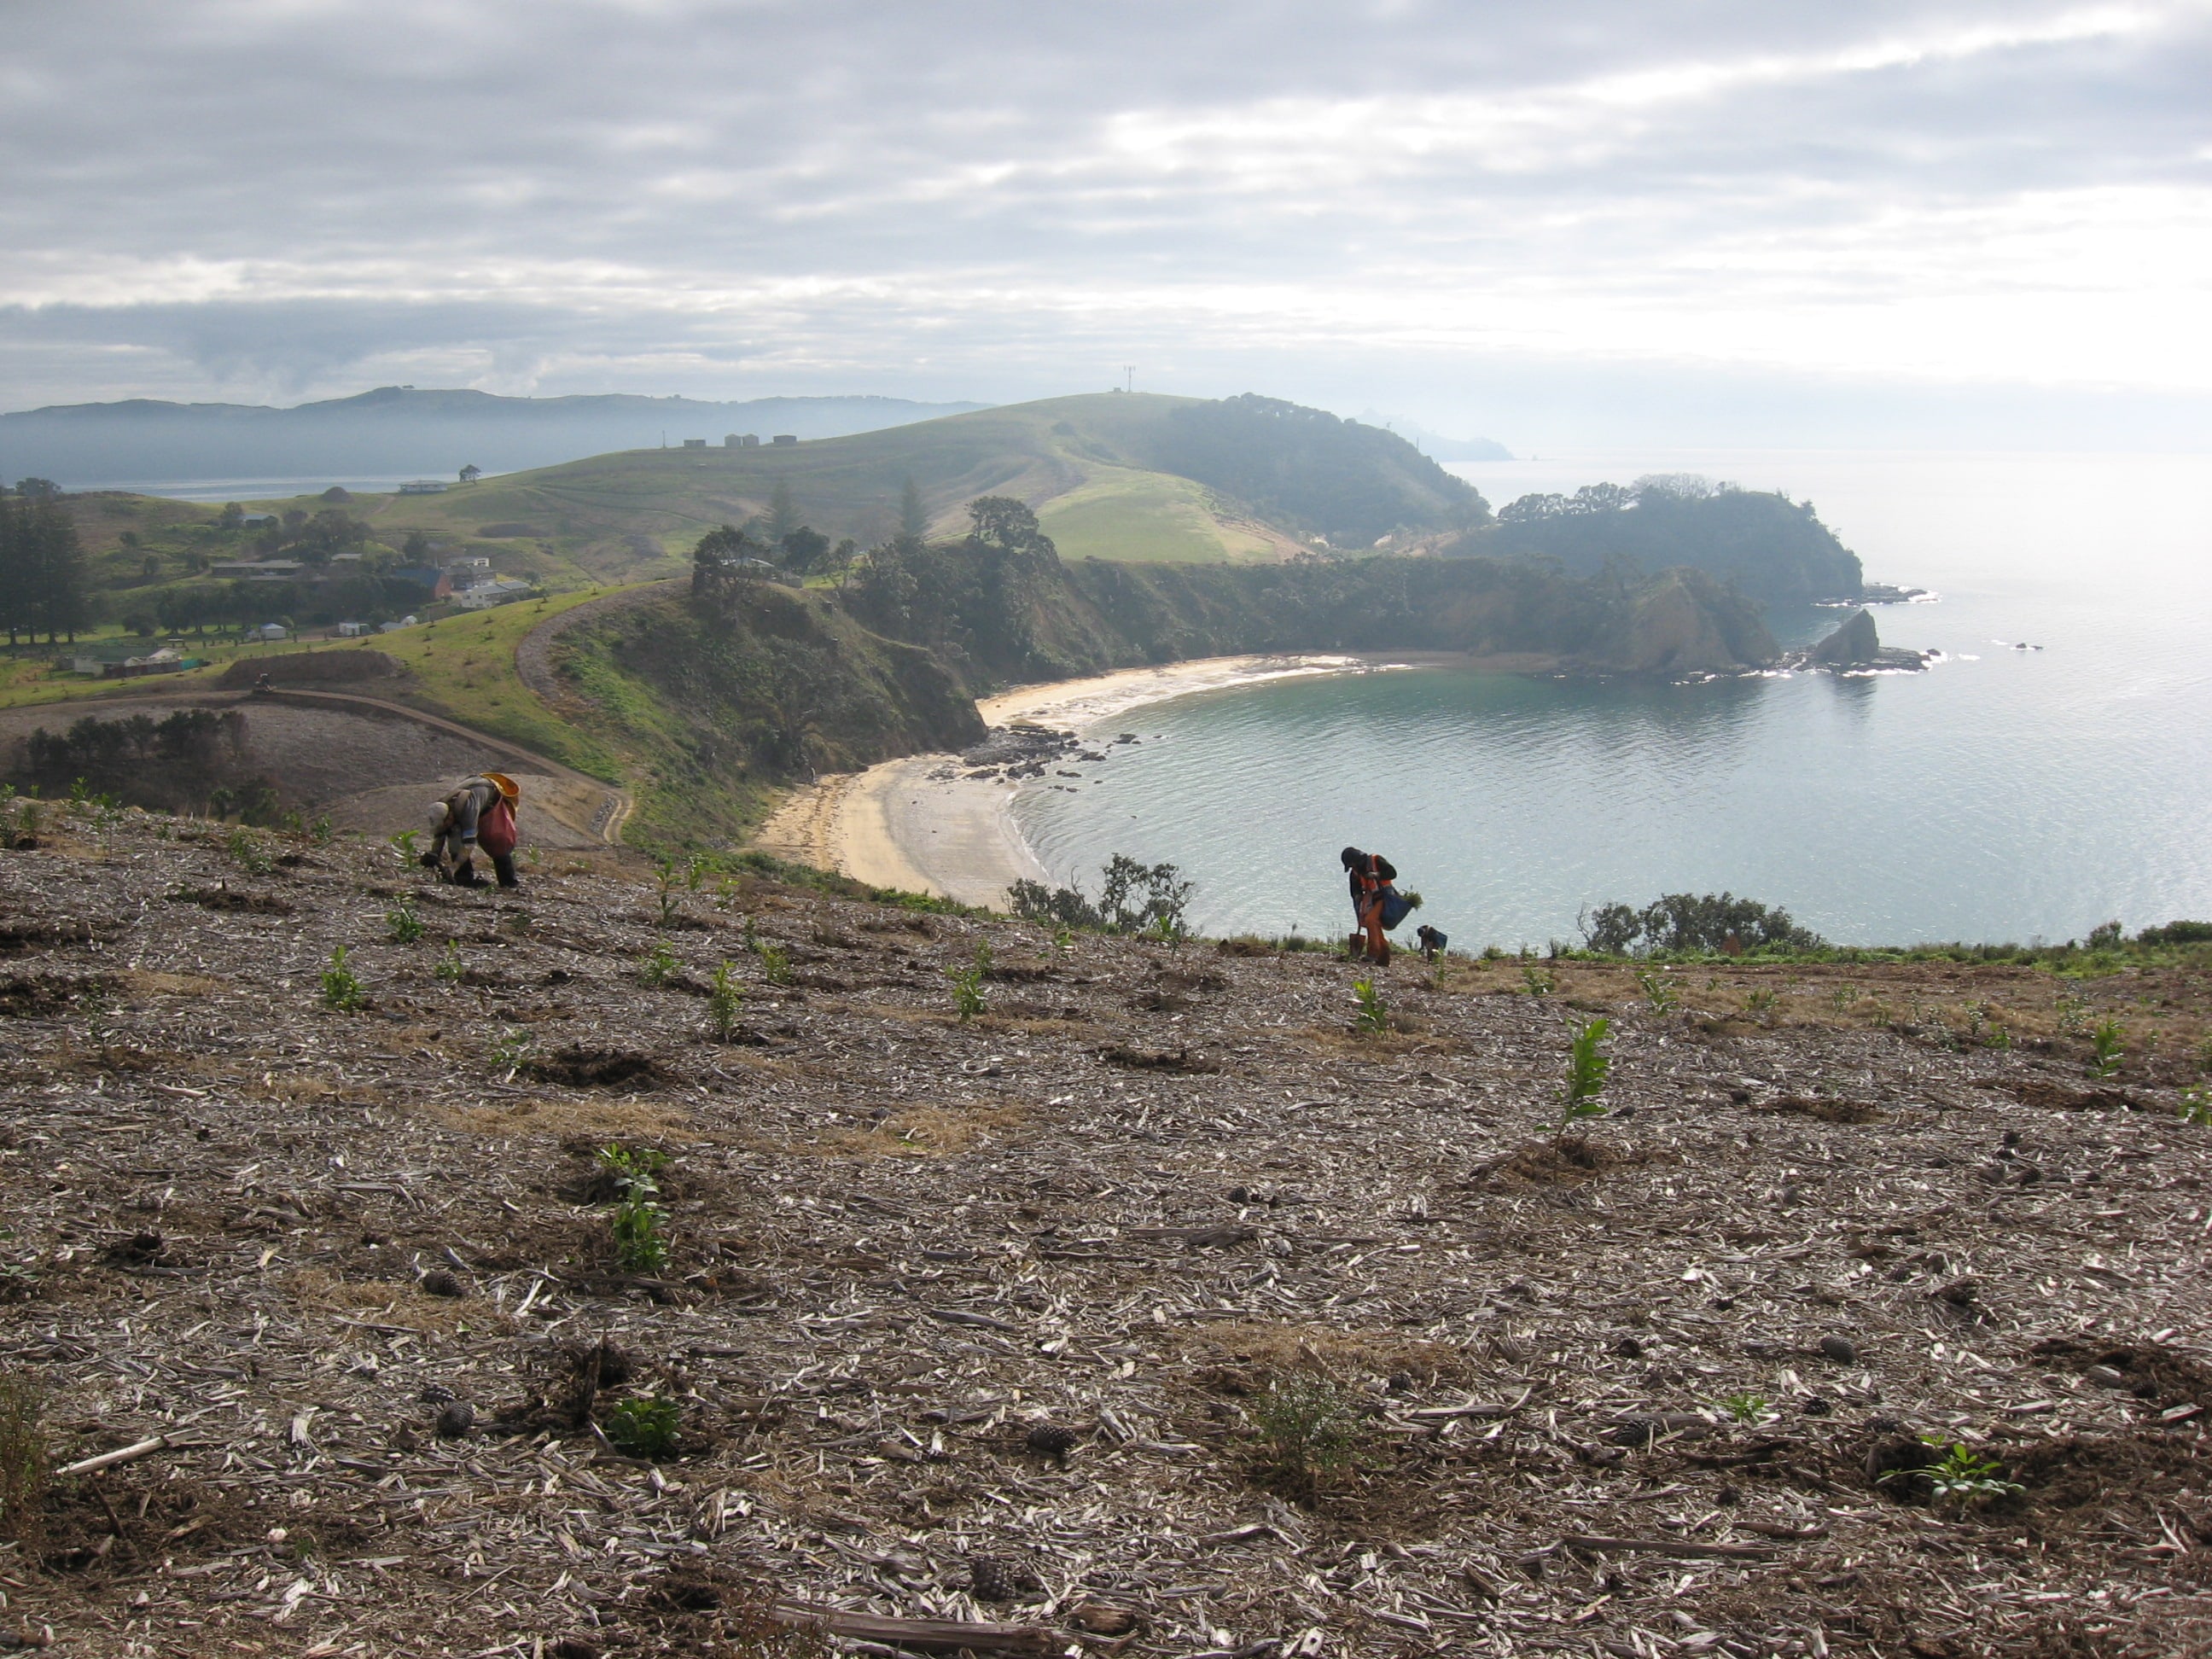 Native Solutions team conducting erosion control and native planting on a hillside in Canterbury, South Island